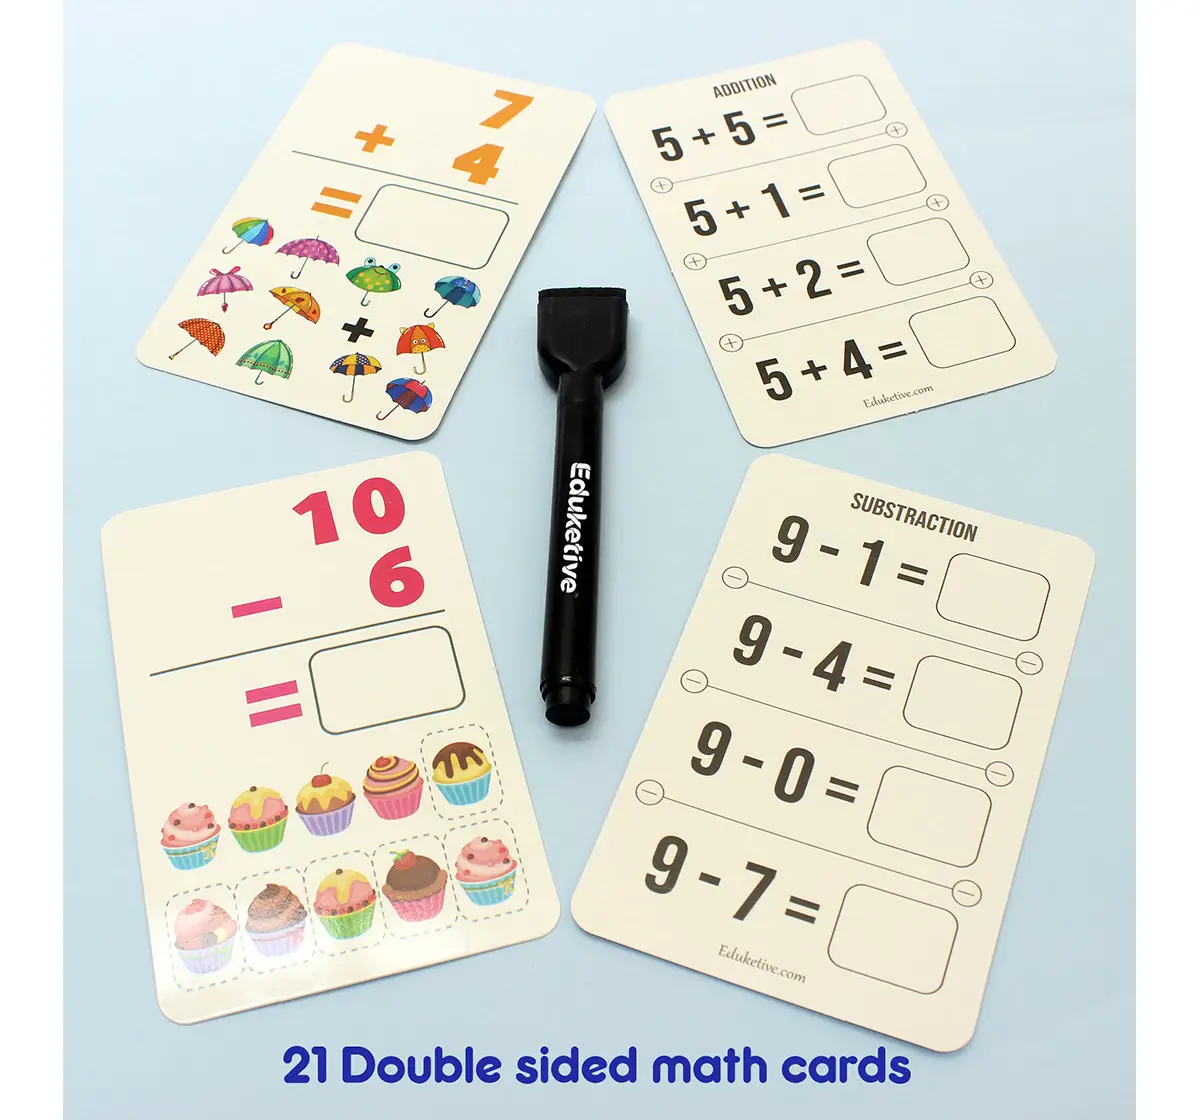 Eduketive 1+2=3 PREMATH Write & Wipe Reusable Activity 3-9 yrs Writing Practice Preschool Learning Educational Game with Exercise Book